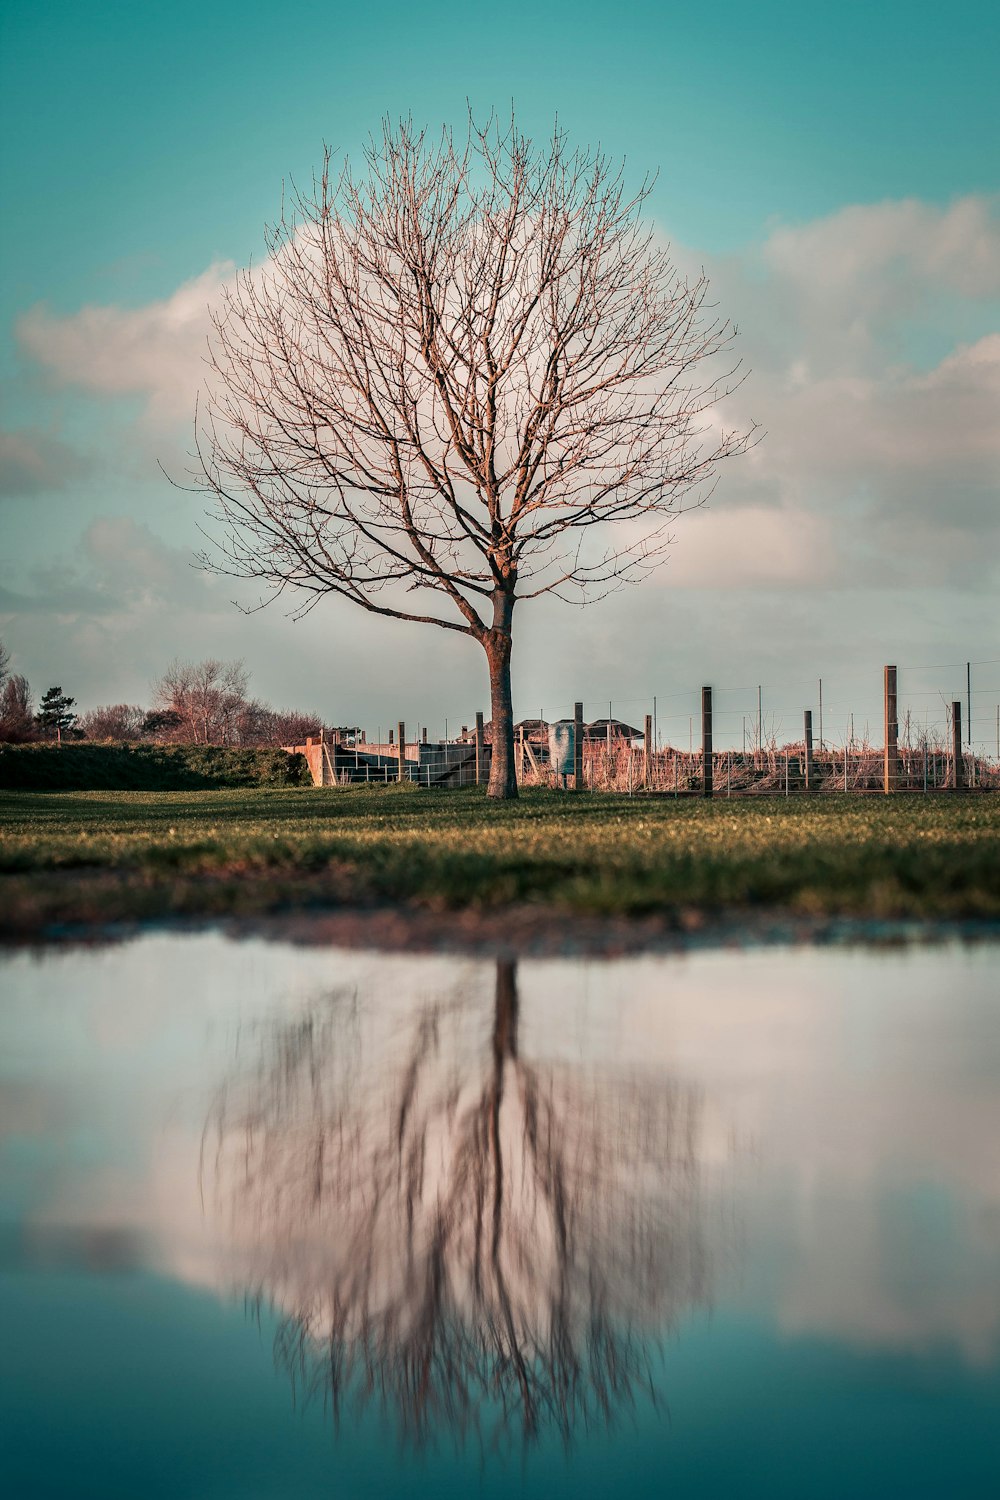 bare tree in pasture near body of water under cloudy sky